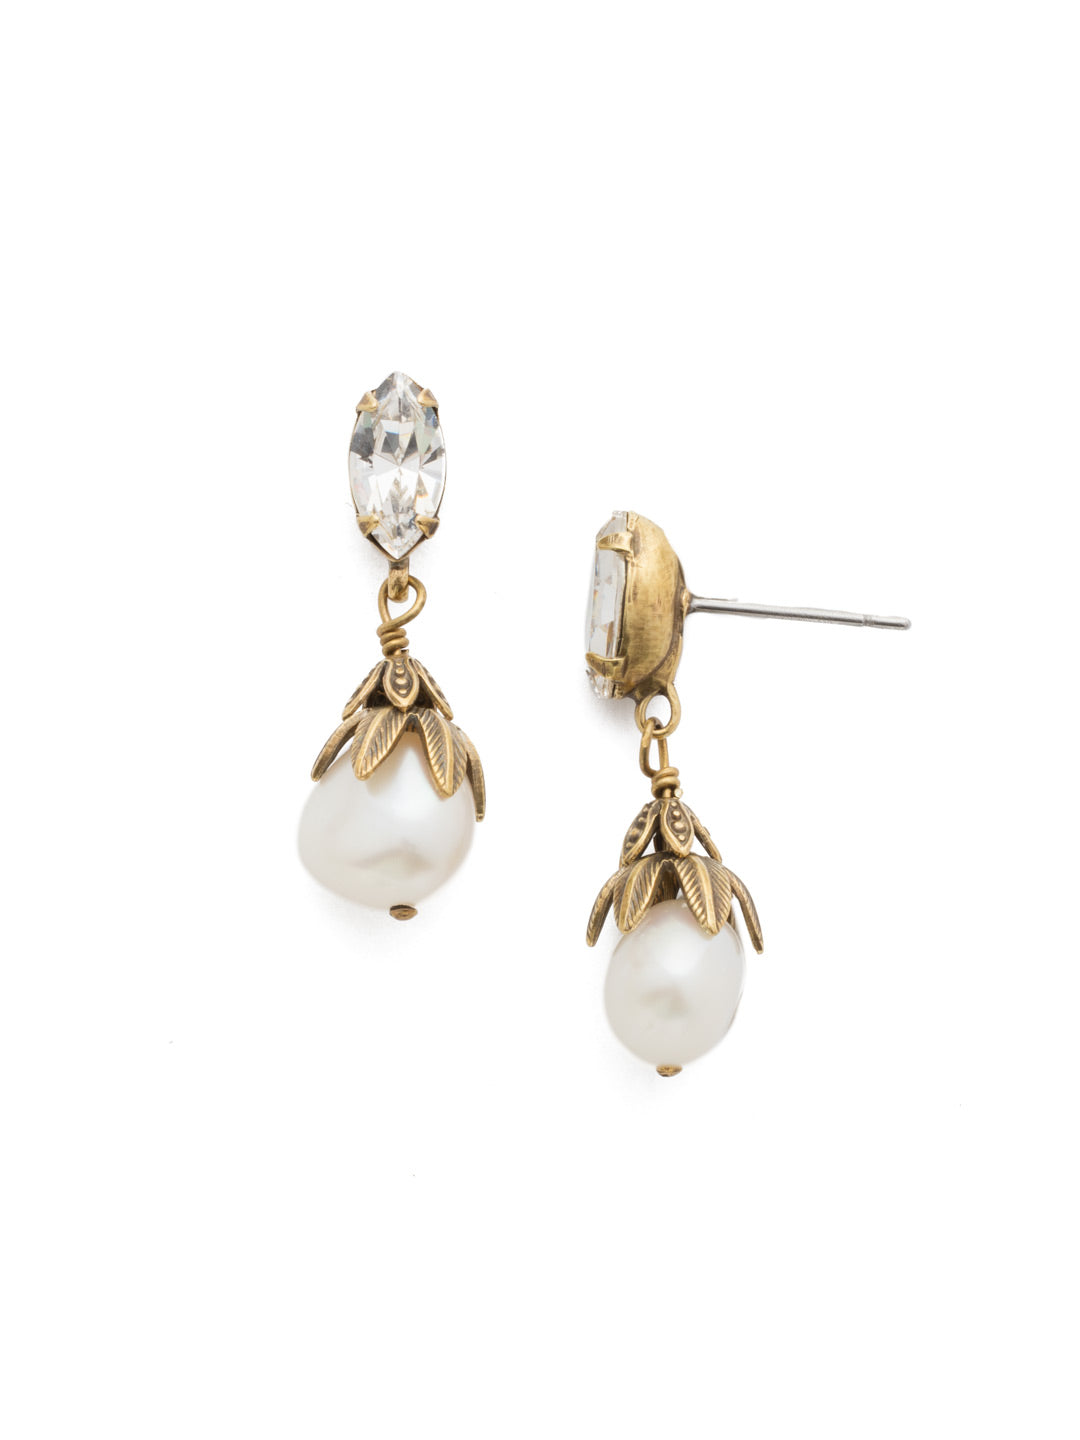 Jovi Dangle Earrings - 4EEF5AGCRY - <p>Simple. Stunning. A single pearl dangles from this navette cut crystal that makes the perfect gift for anyone - including yourself. We won't tell. From Sorrelli's Crystal collection in our Antique Gold-tone finish.</p>